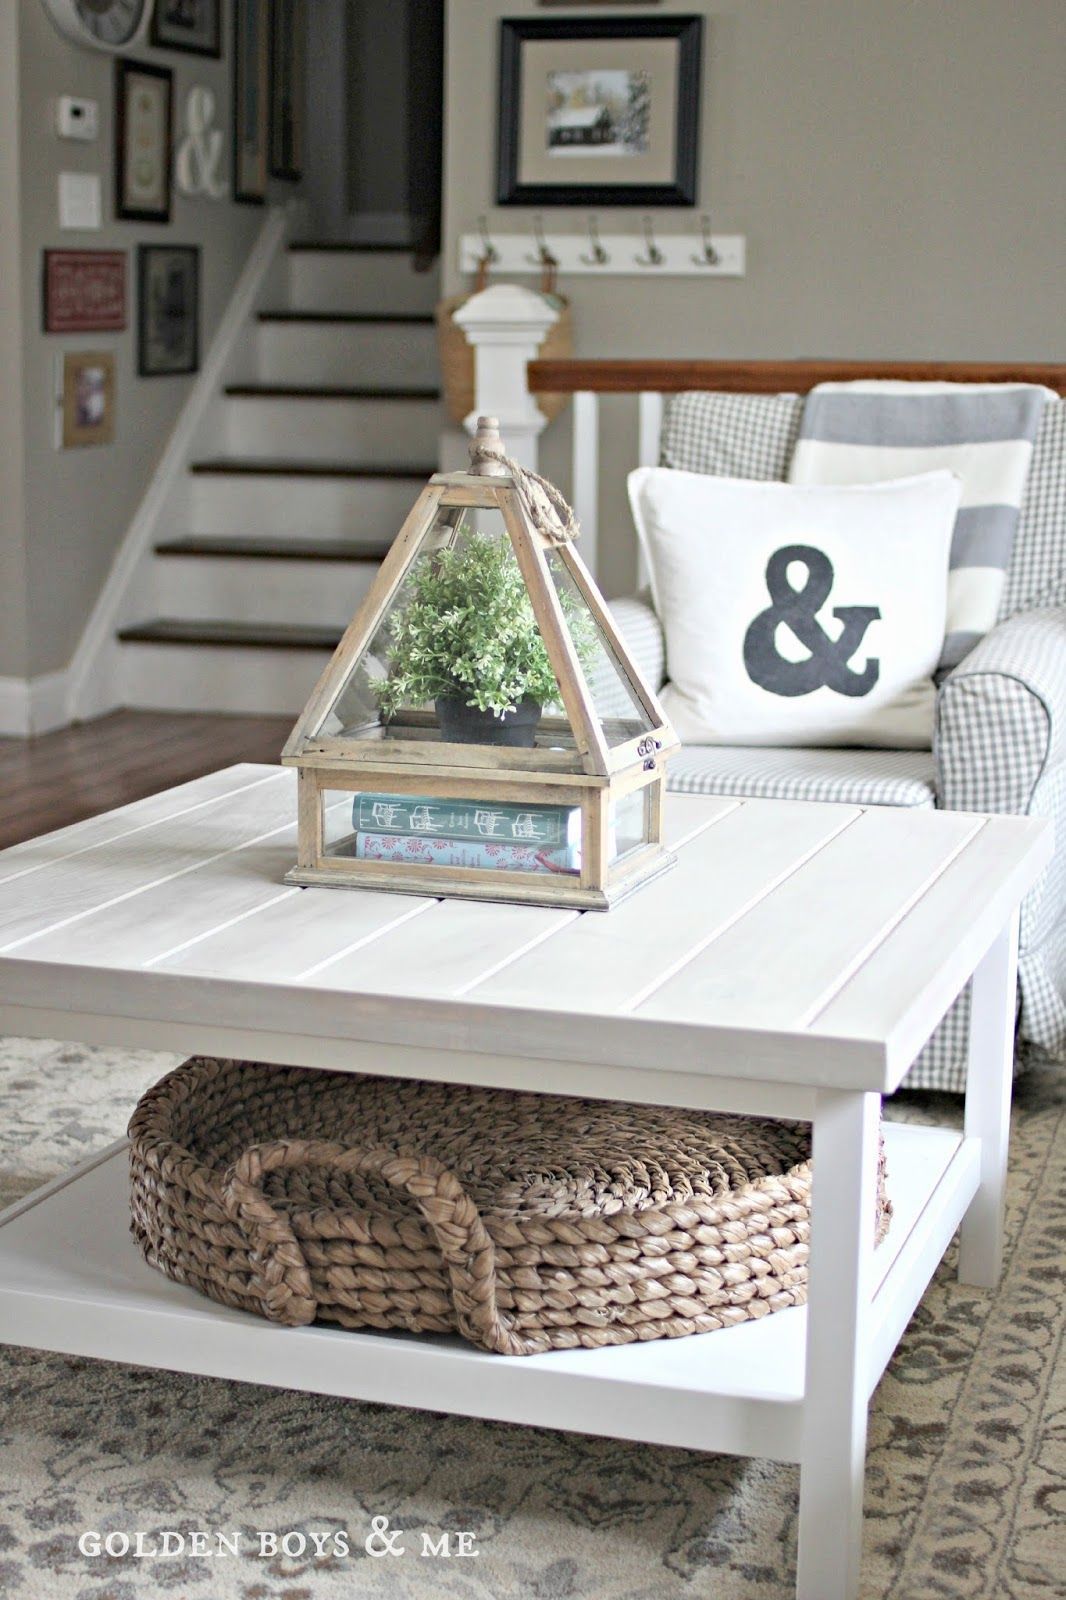 Coffee Table Tutorial (Ikea Hack): I have some of these tables that I could freshen up!!!